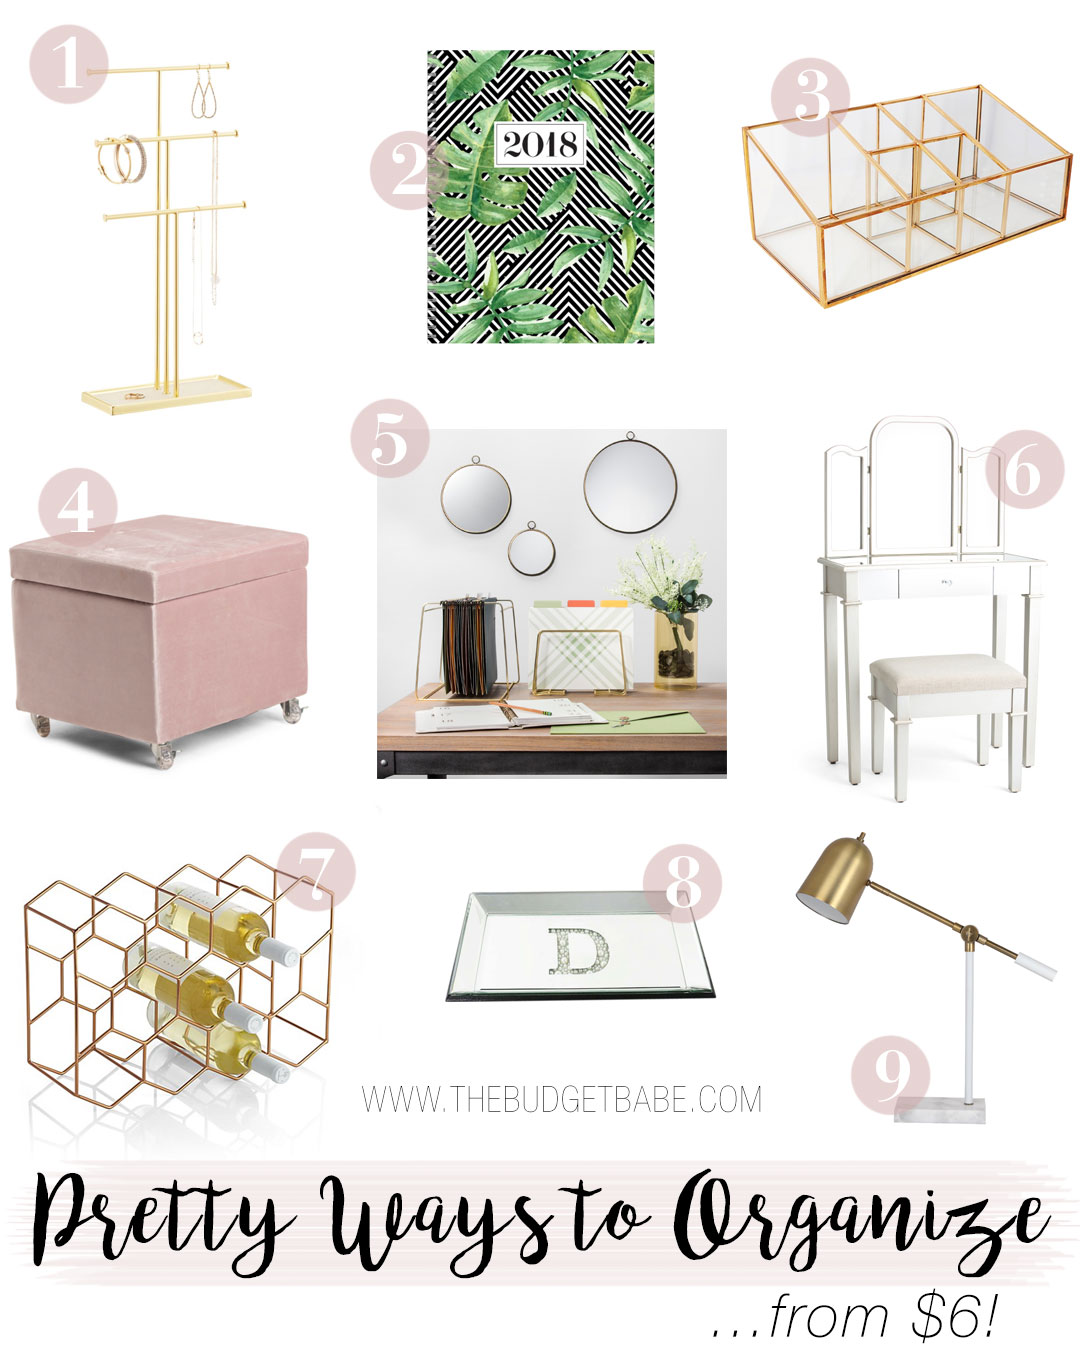 Organize in style with these pretty finds starting at just $5.99